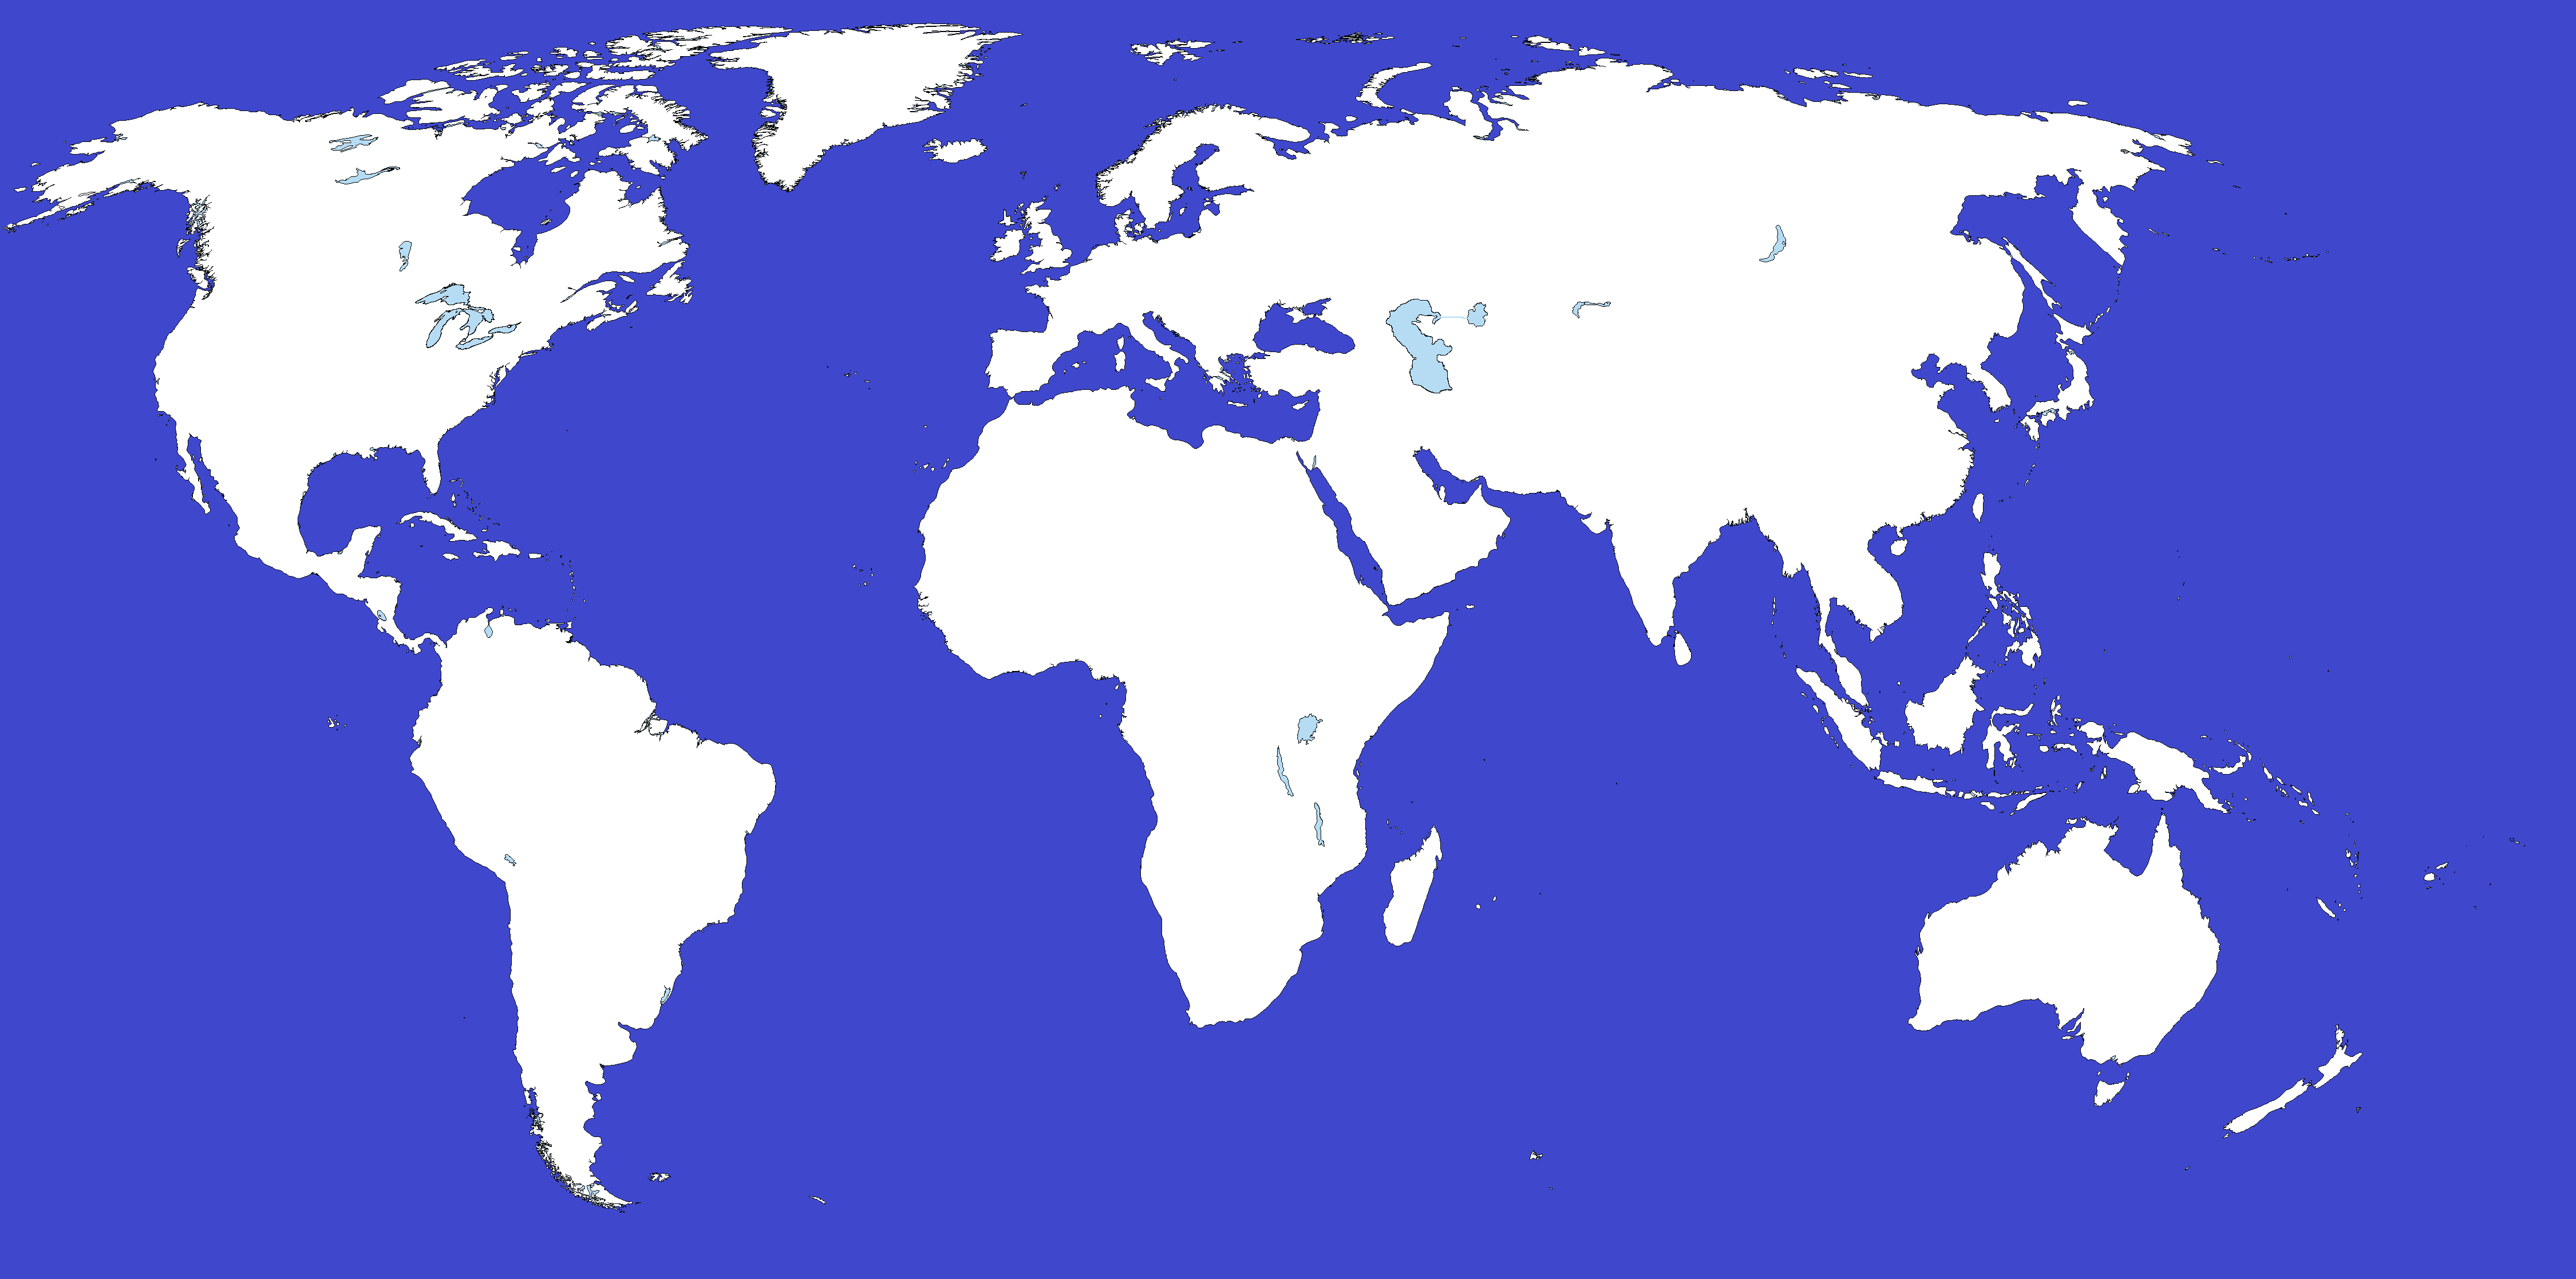 File:A large blank world map with oceans marked in blue.PNG